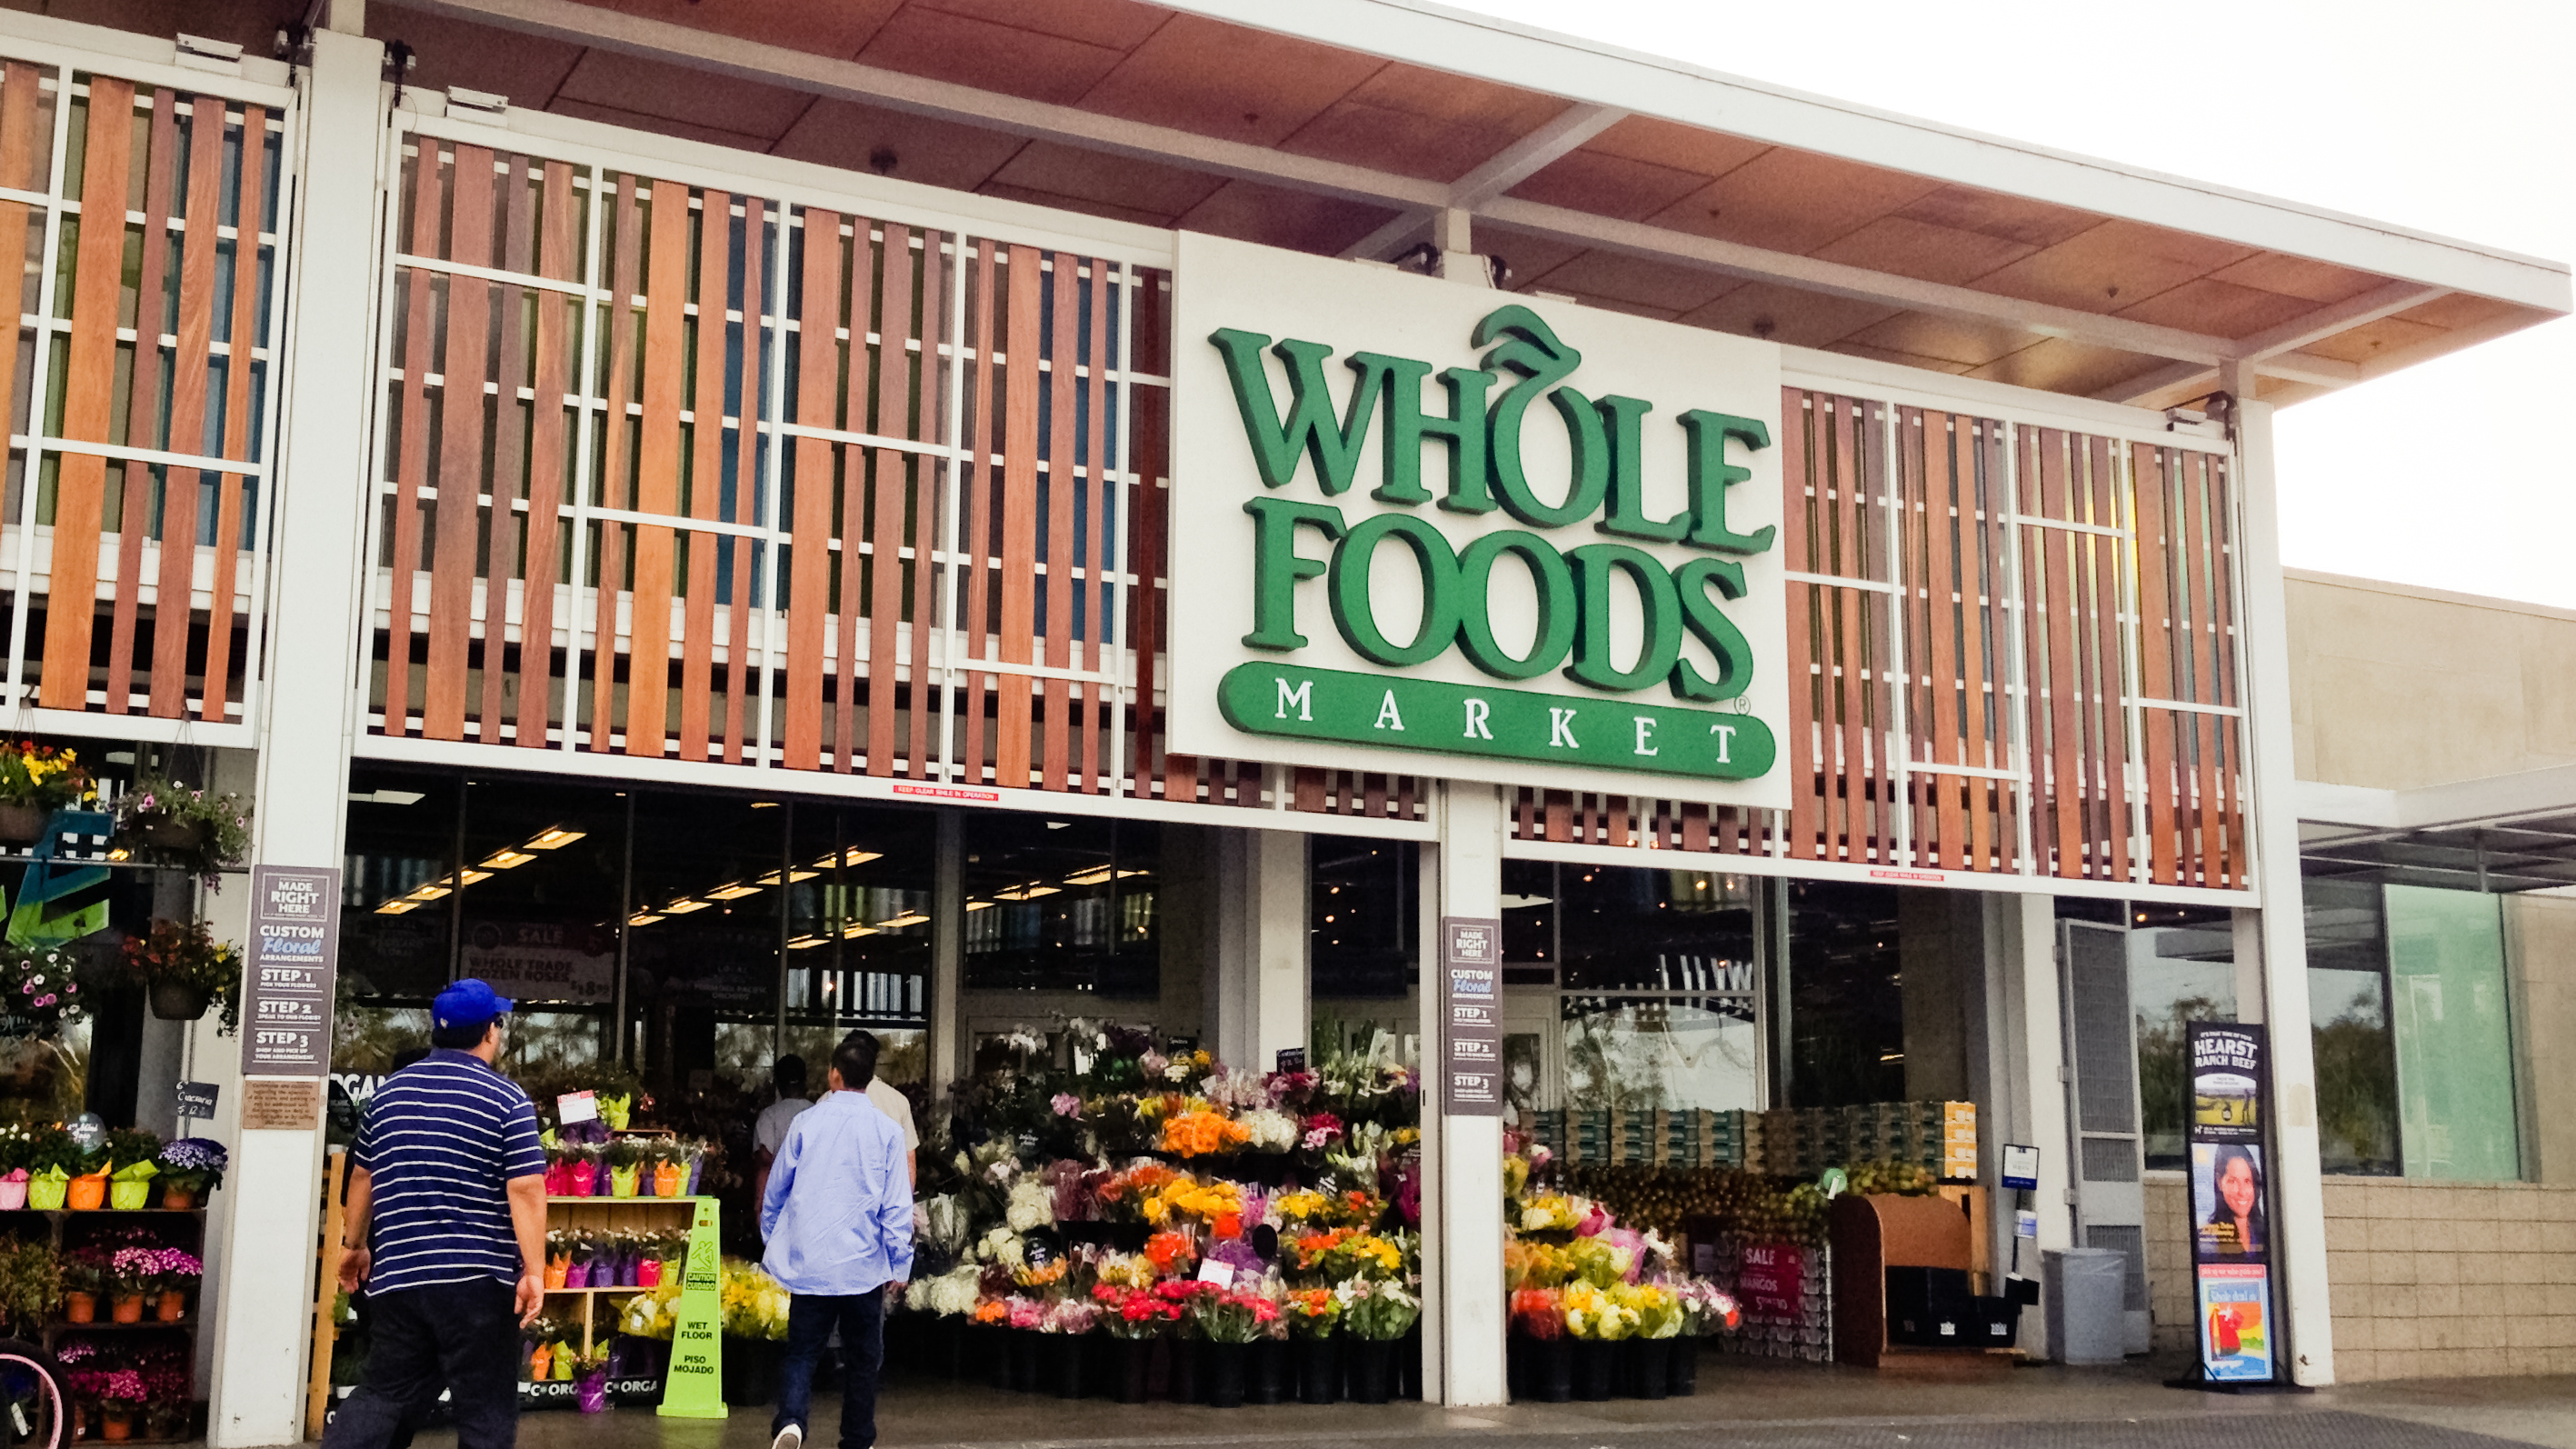 FOX NEWS: Whole Foods workers plan 'sick out' amid coronavirus pandemic, demand better safety and benefits